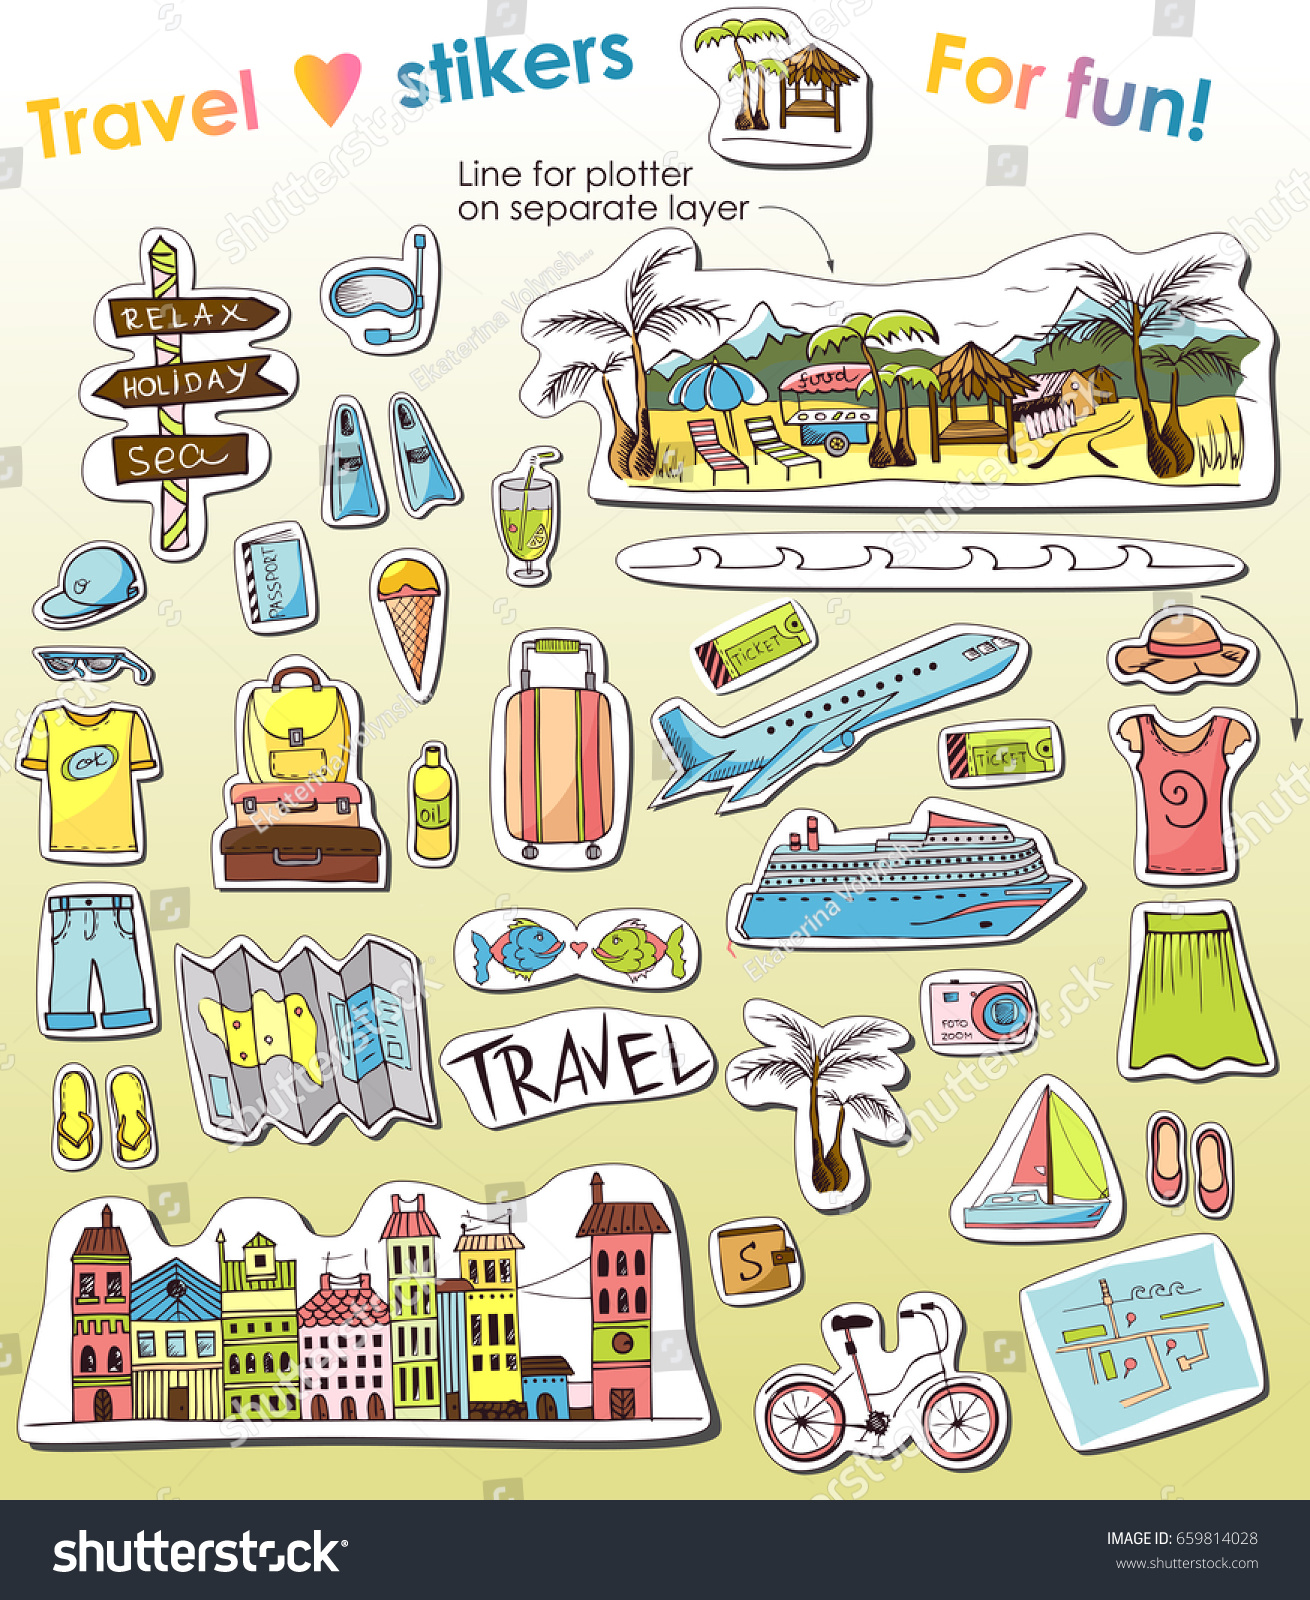 Tourist Kit Travel Stickers Items Traveling Stock Vector Royalty